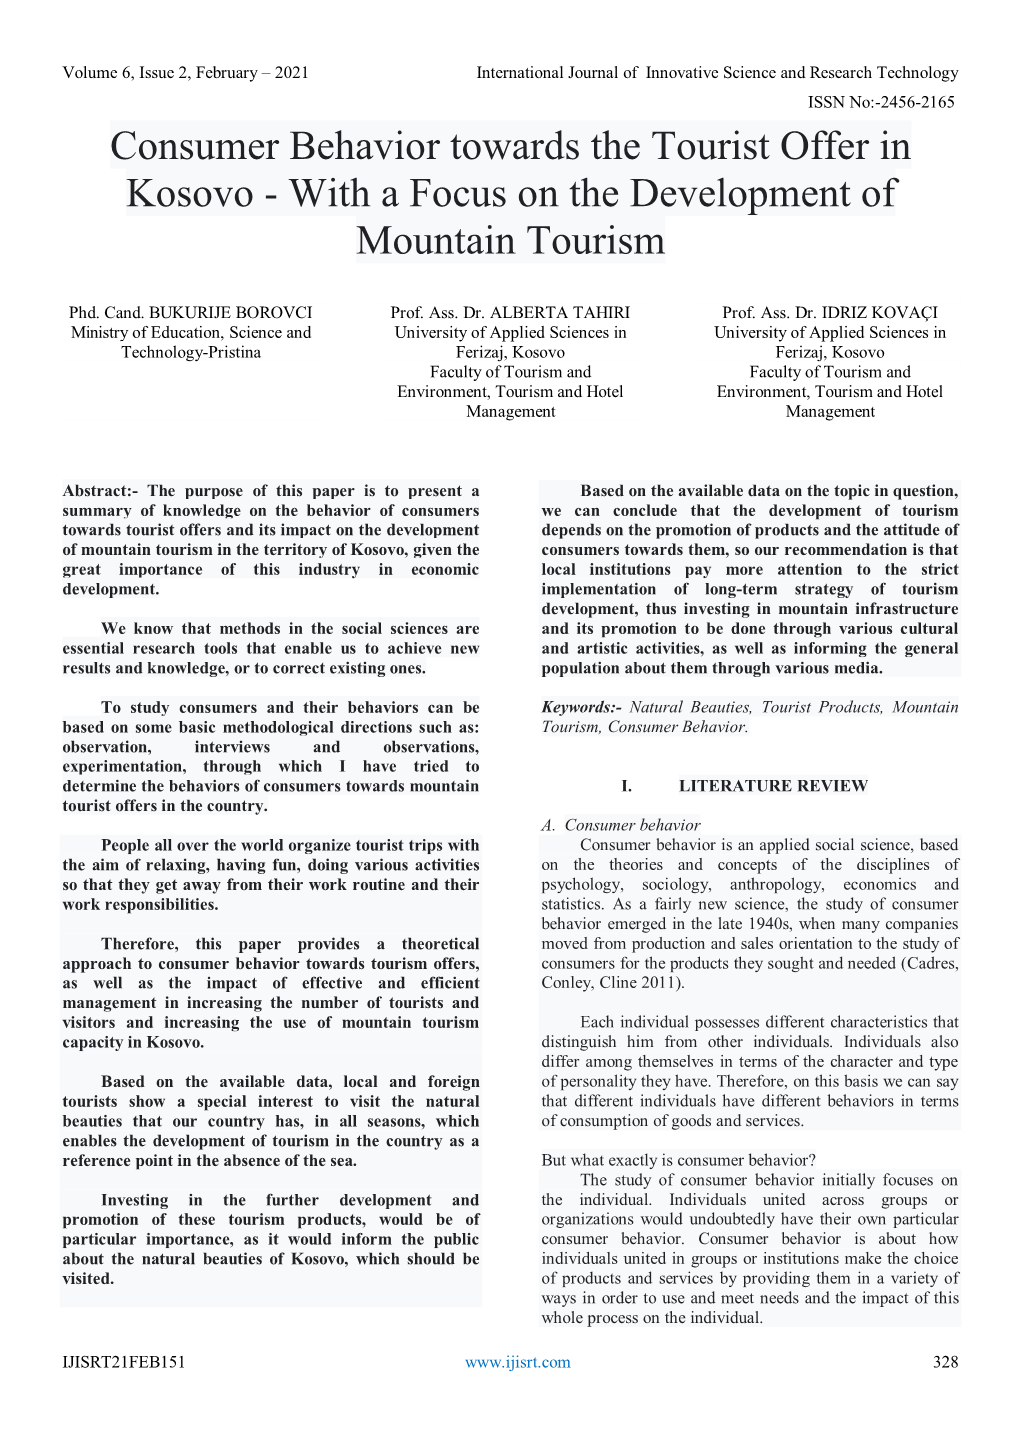 Consumer Behavior Towards the Tourist Offer in Kosovo - with a Focus on the Development of Mountain Tourism